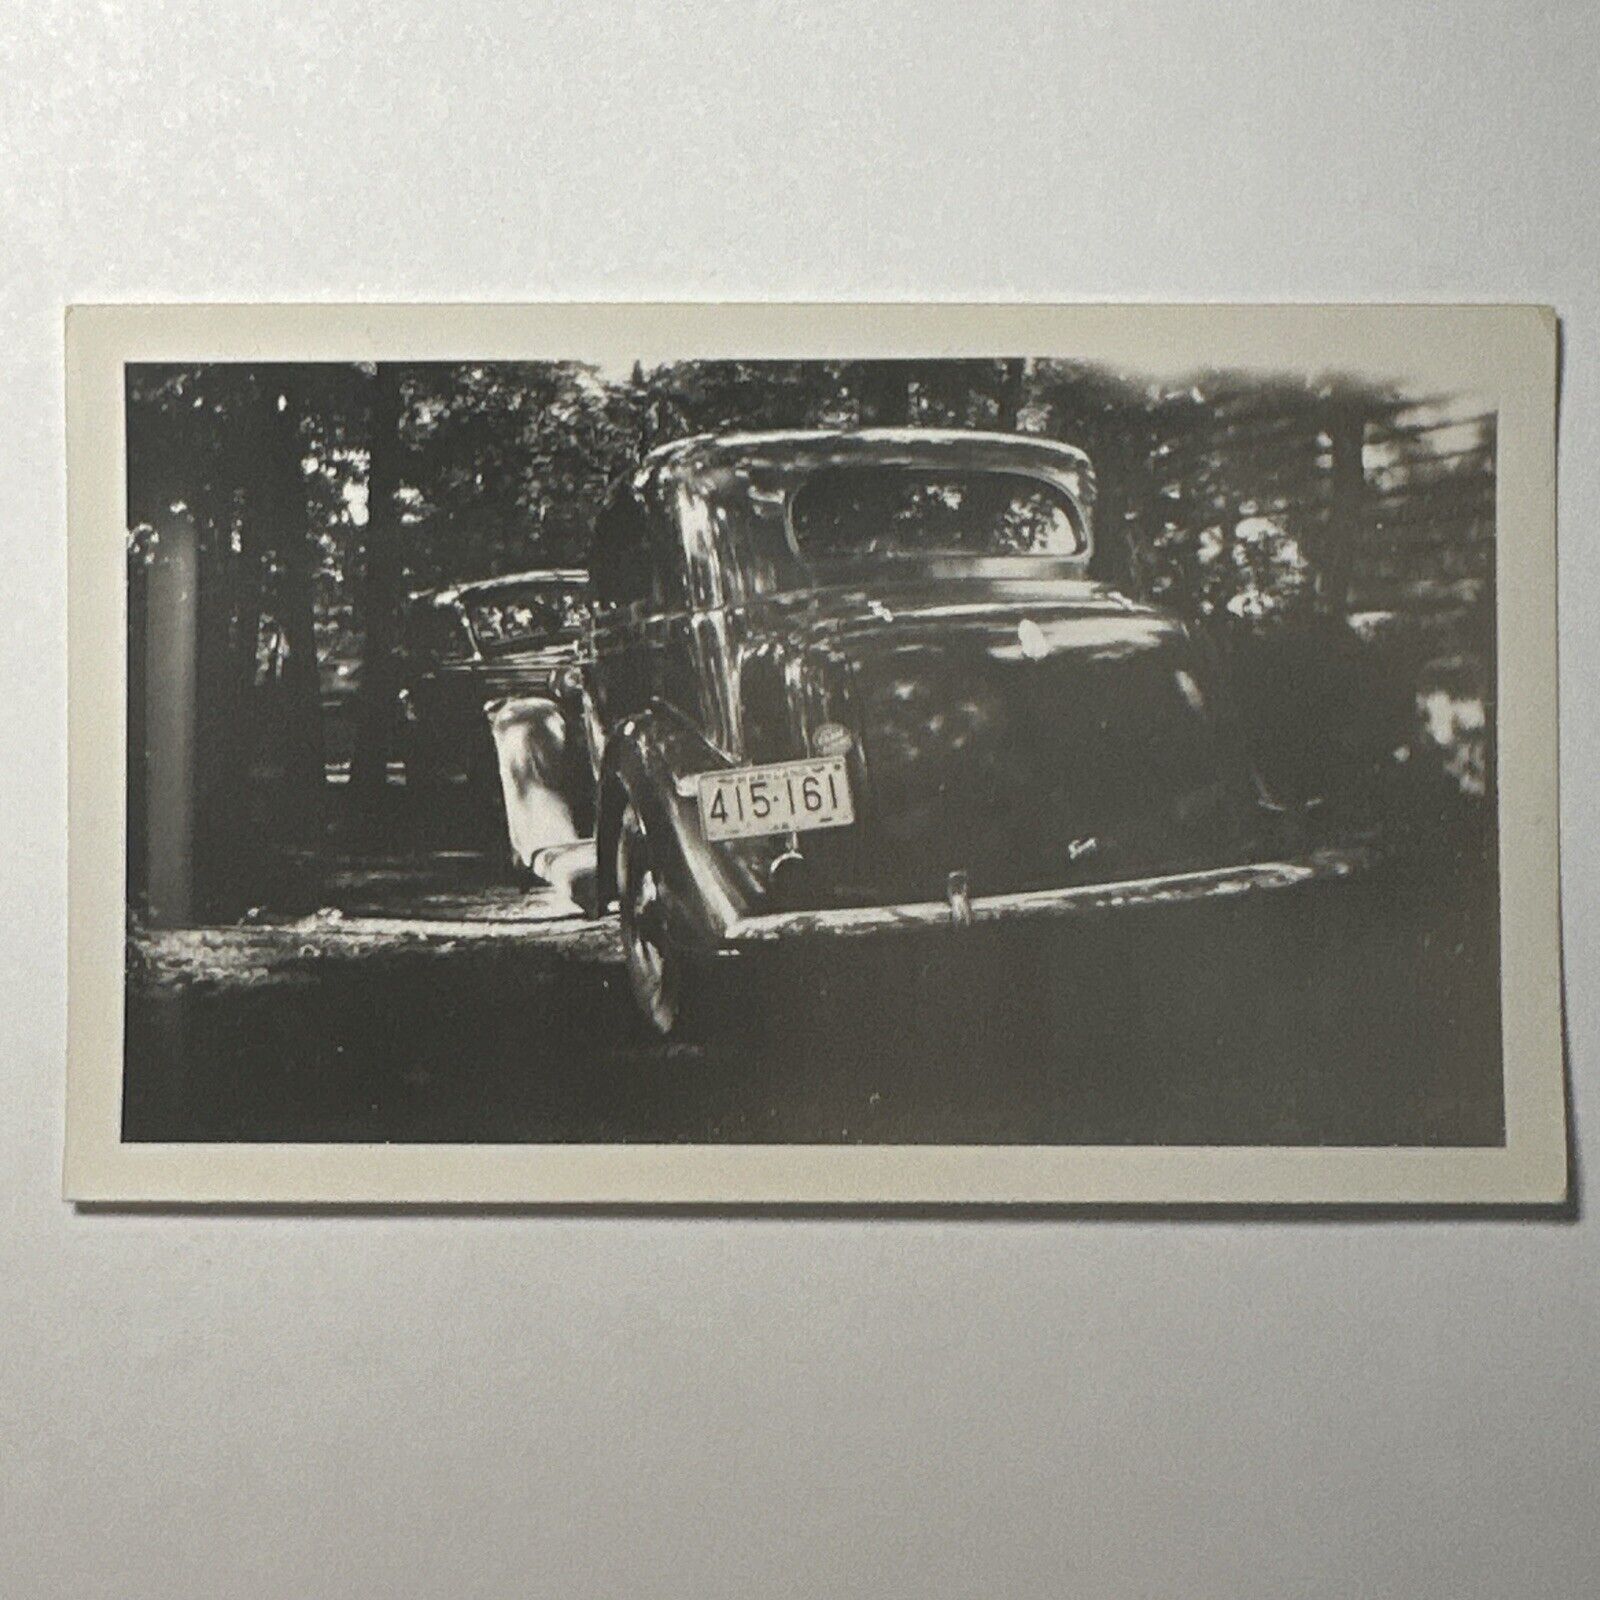 VINTAGE PHOTO Gorgeous Classic Car With Maryland License Plate Original Snapshot